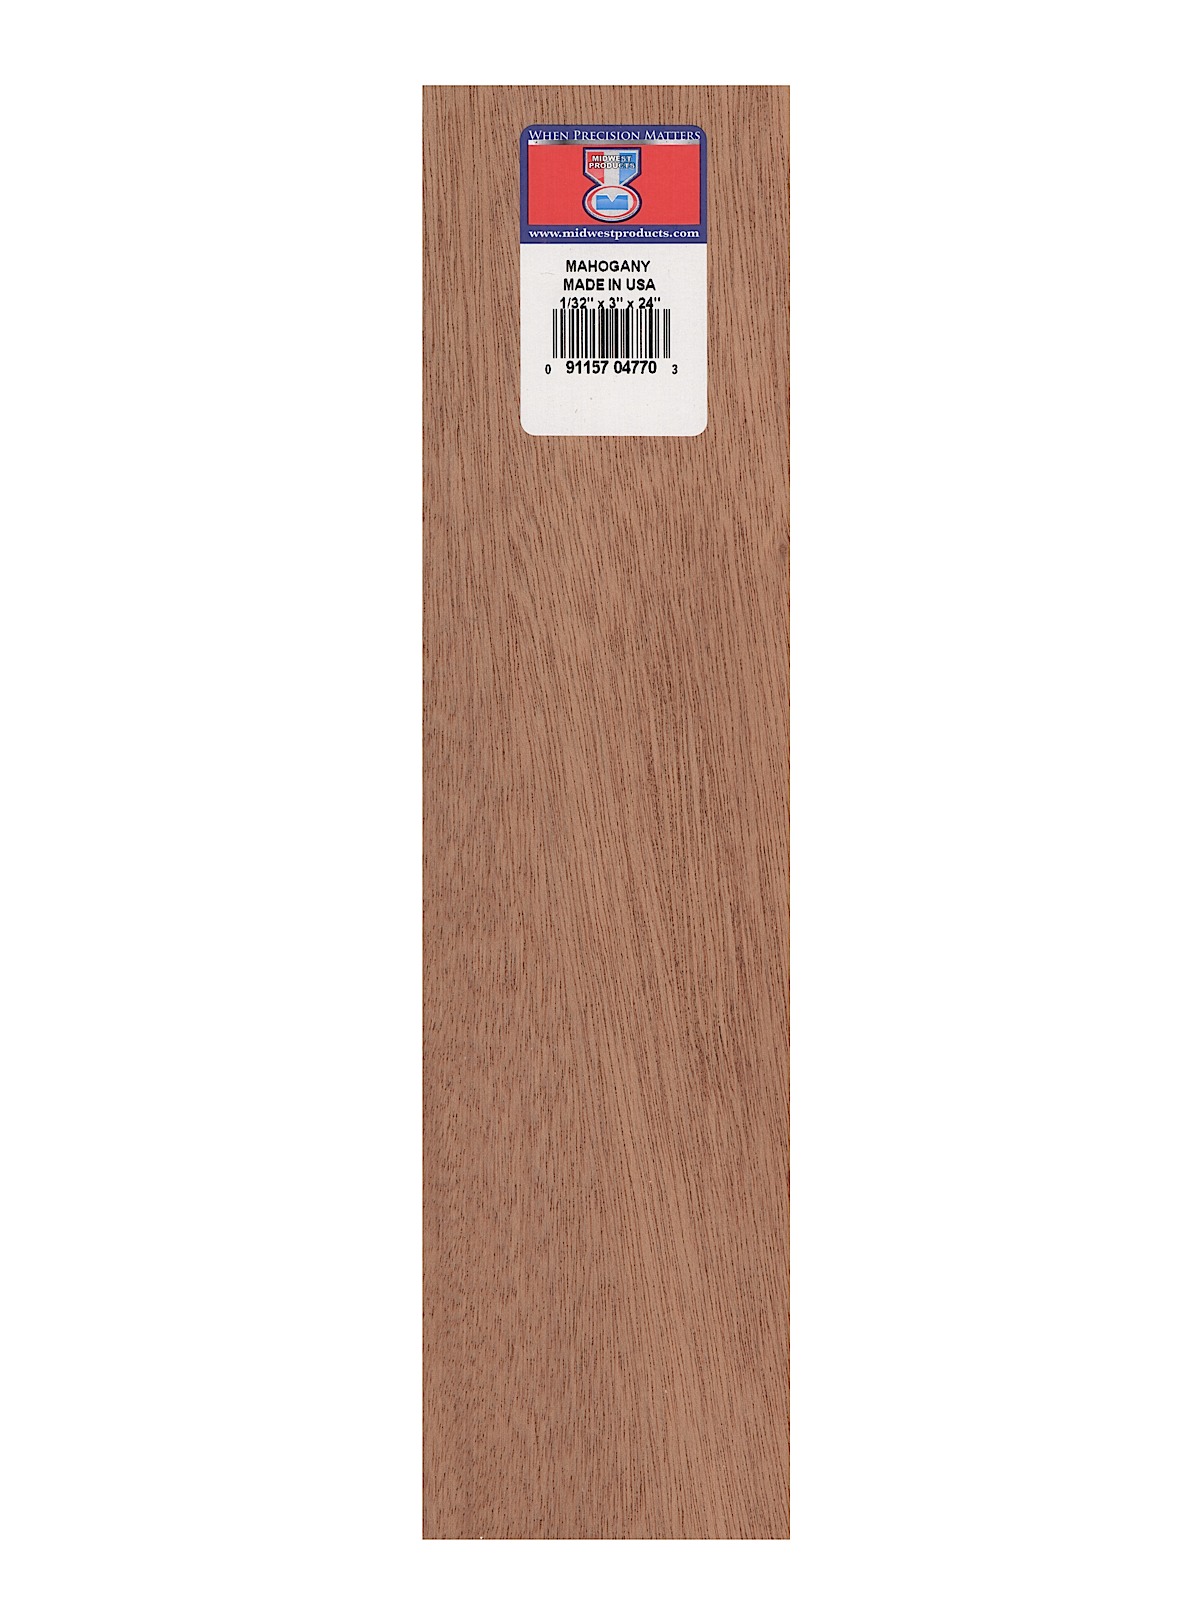 Mahogany Project Woods 1 32 In. X 3 In. X 24 In. Sheet